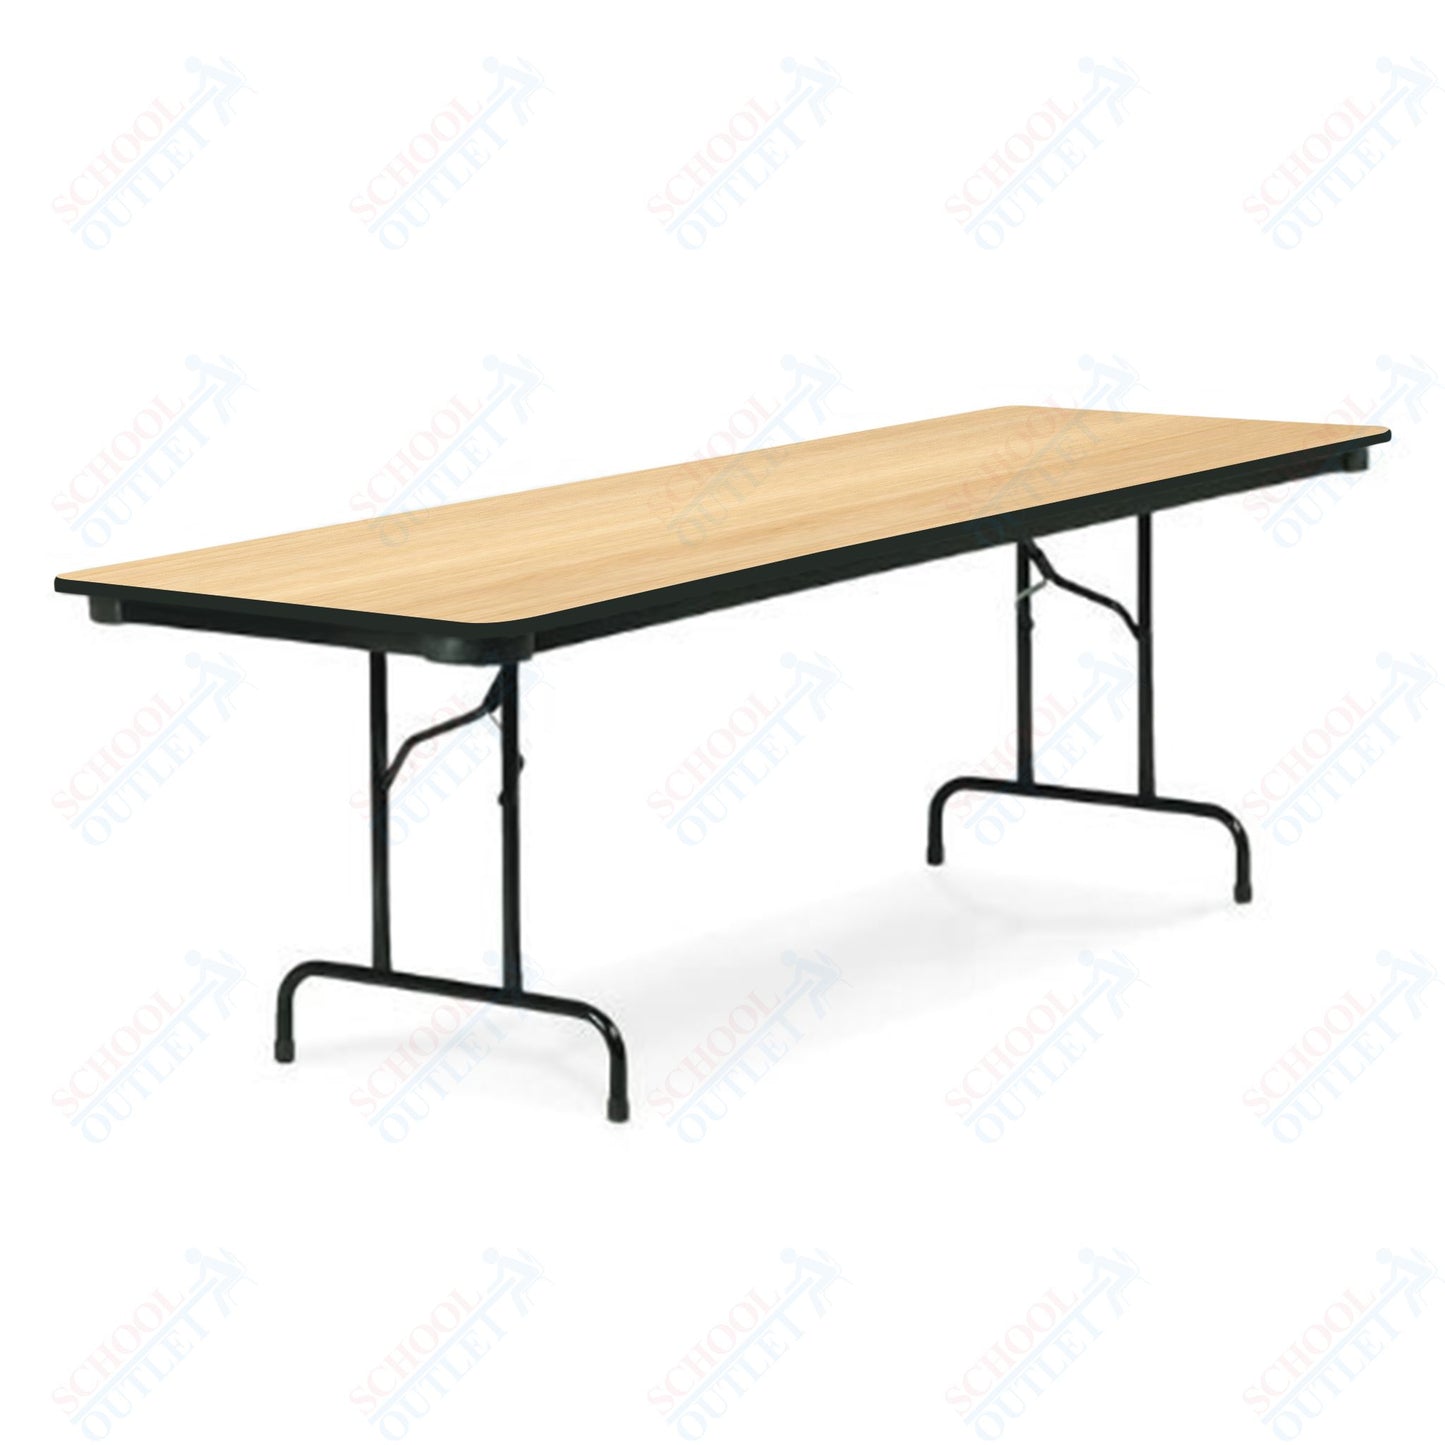 Virco 603672 - 6000 series 3/4" thick particle board folding table 36W" x 72"L